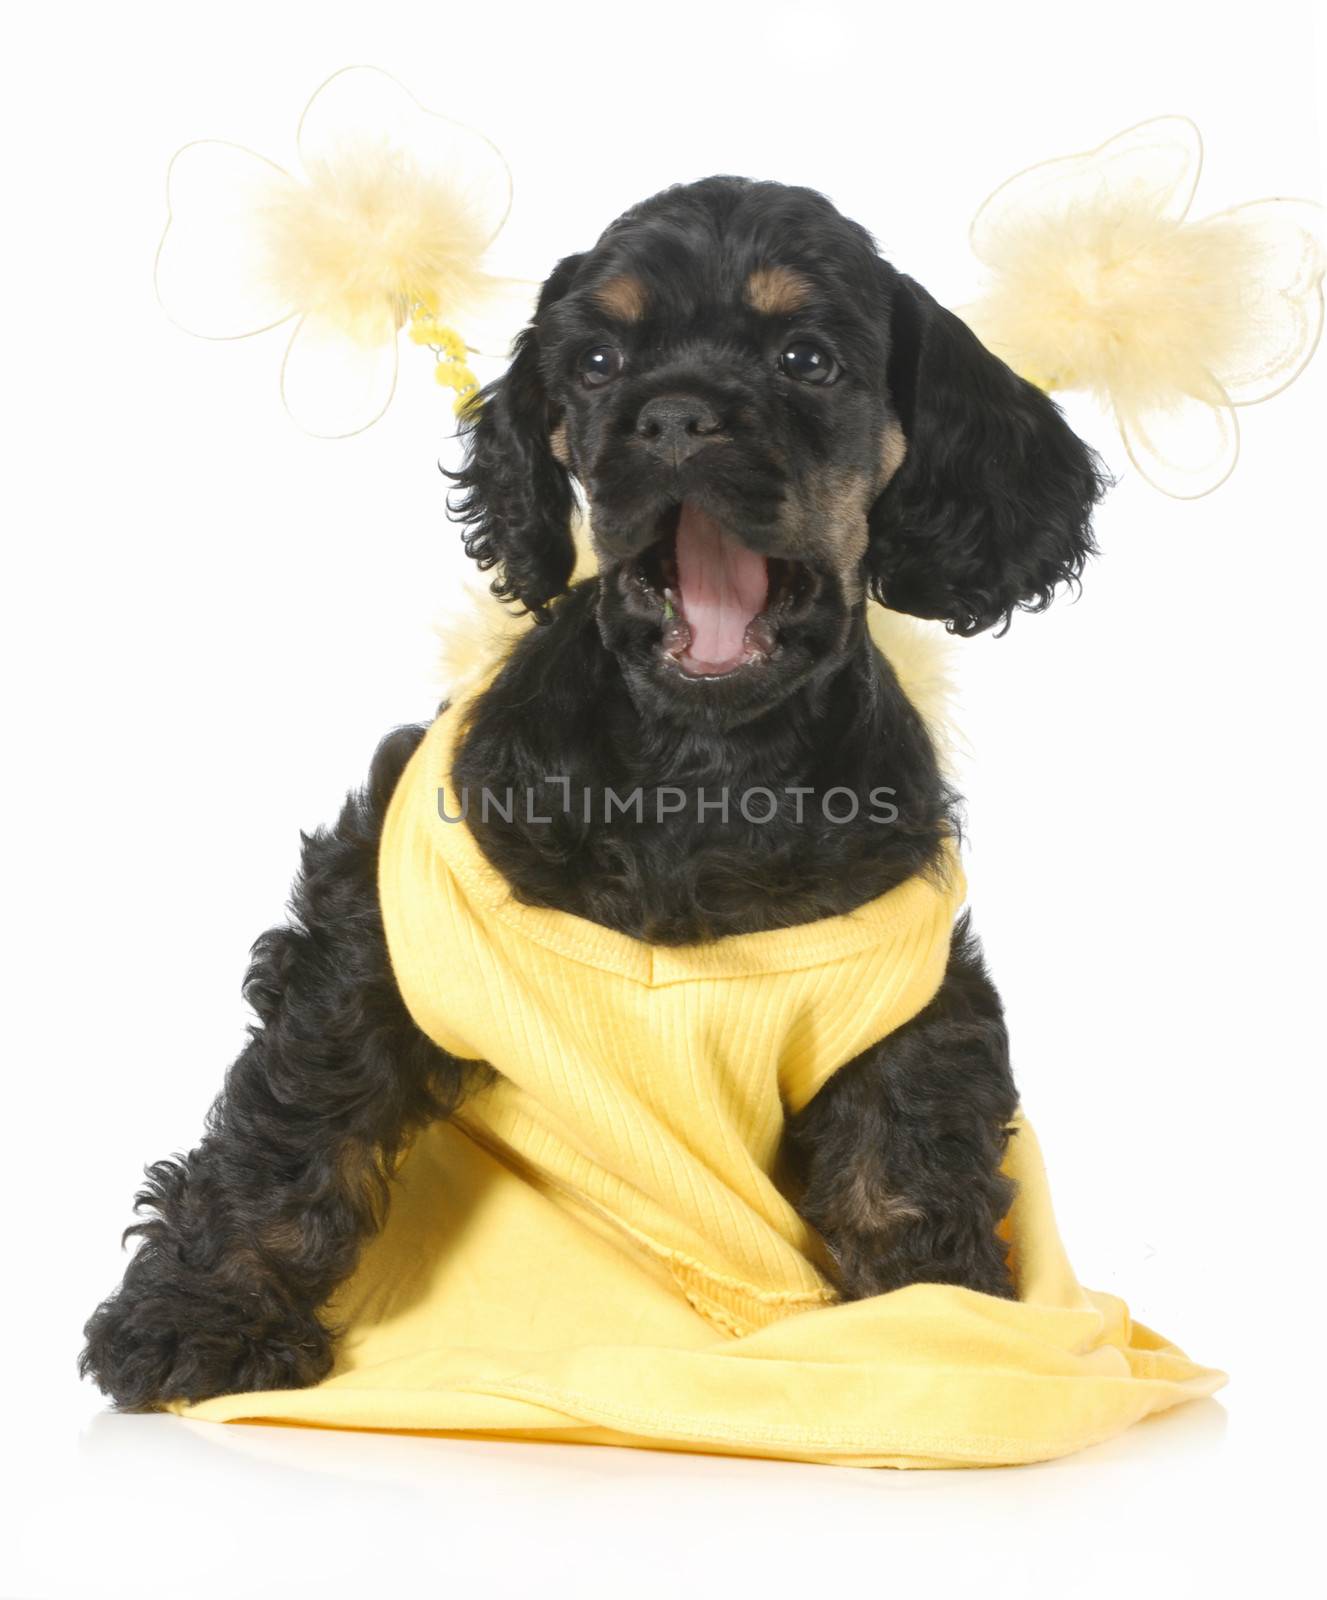 cute female puppy - american cocker spaniel puppy with silly expression on white background - 8 weeks old